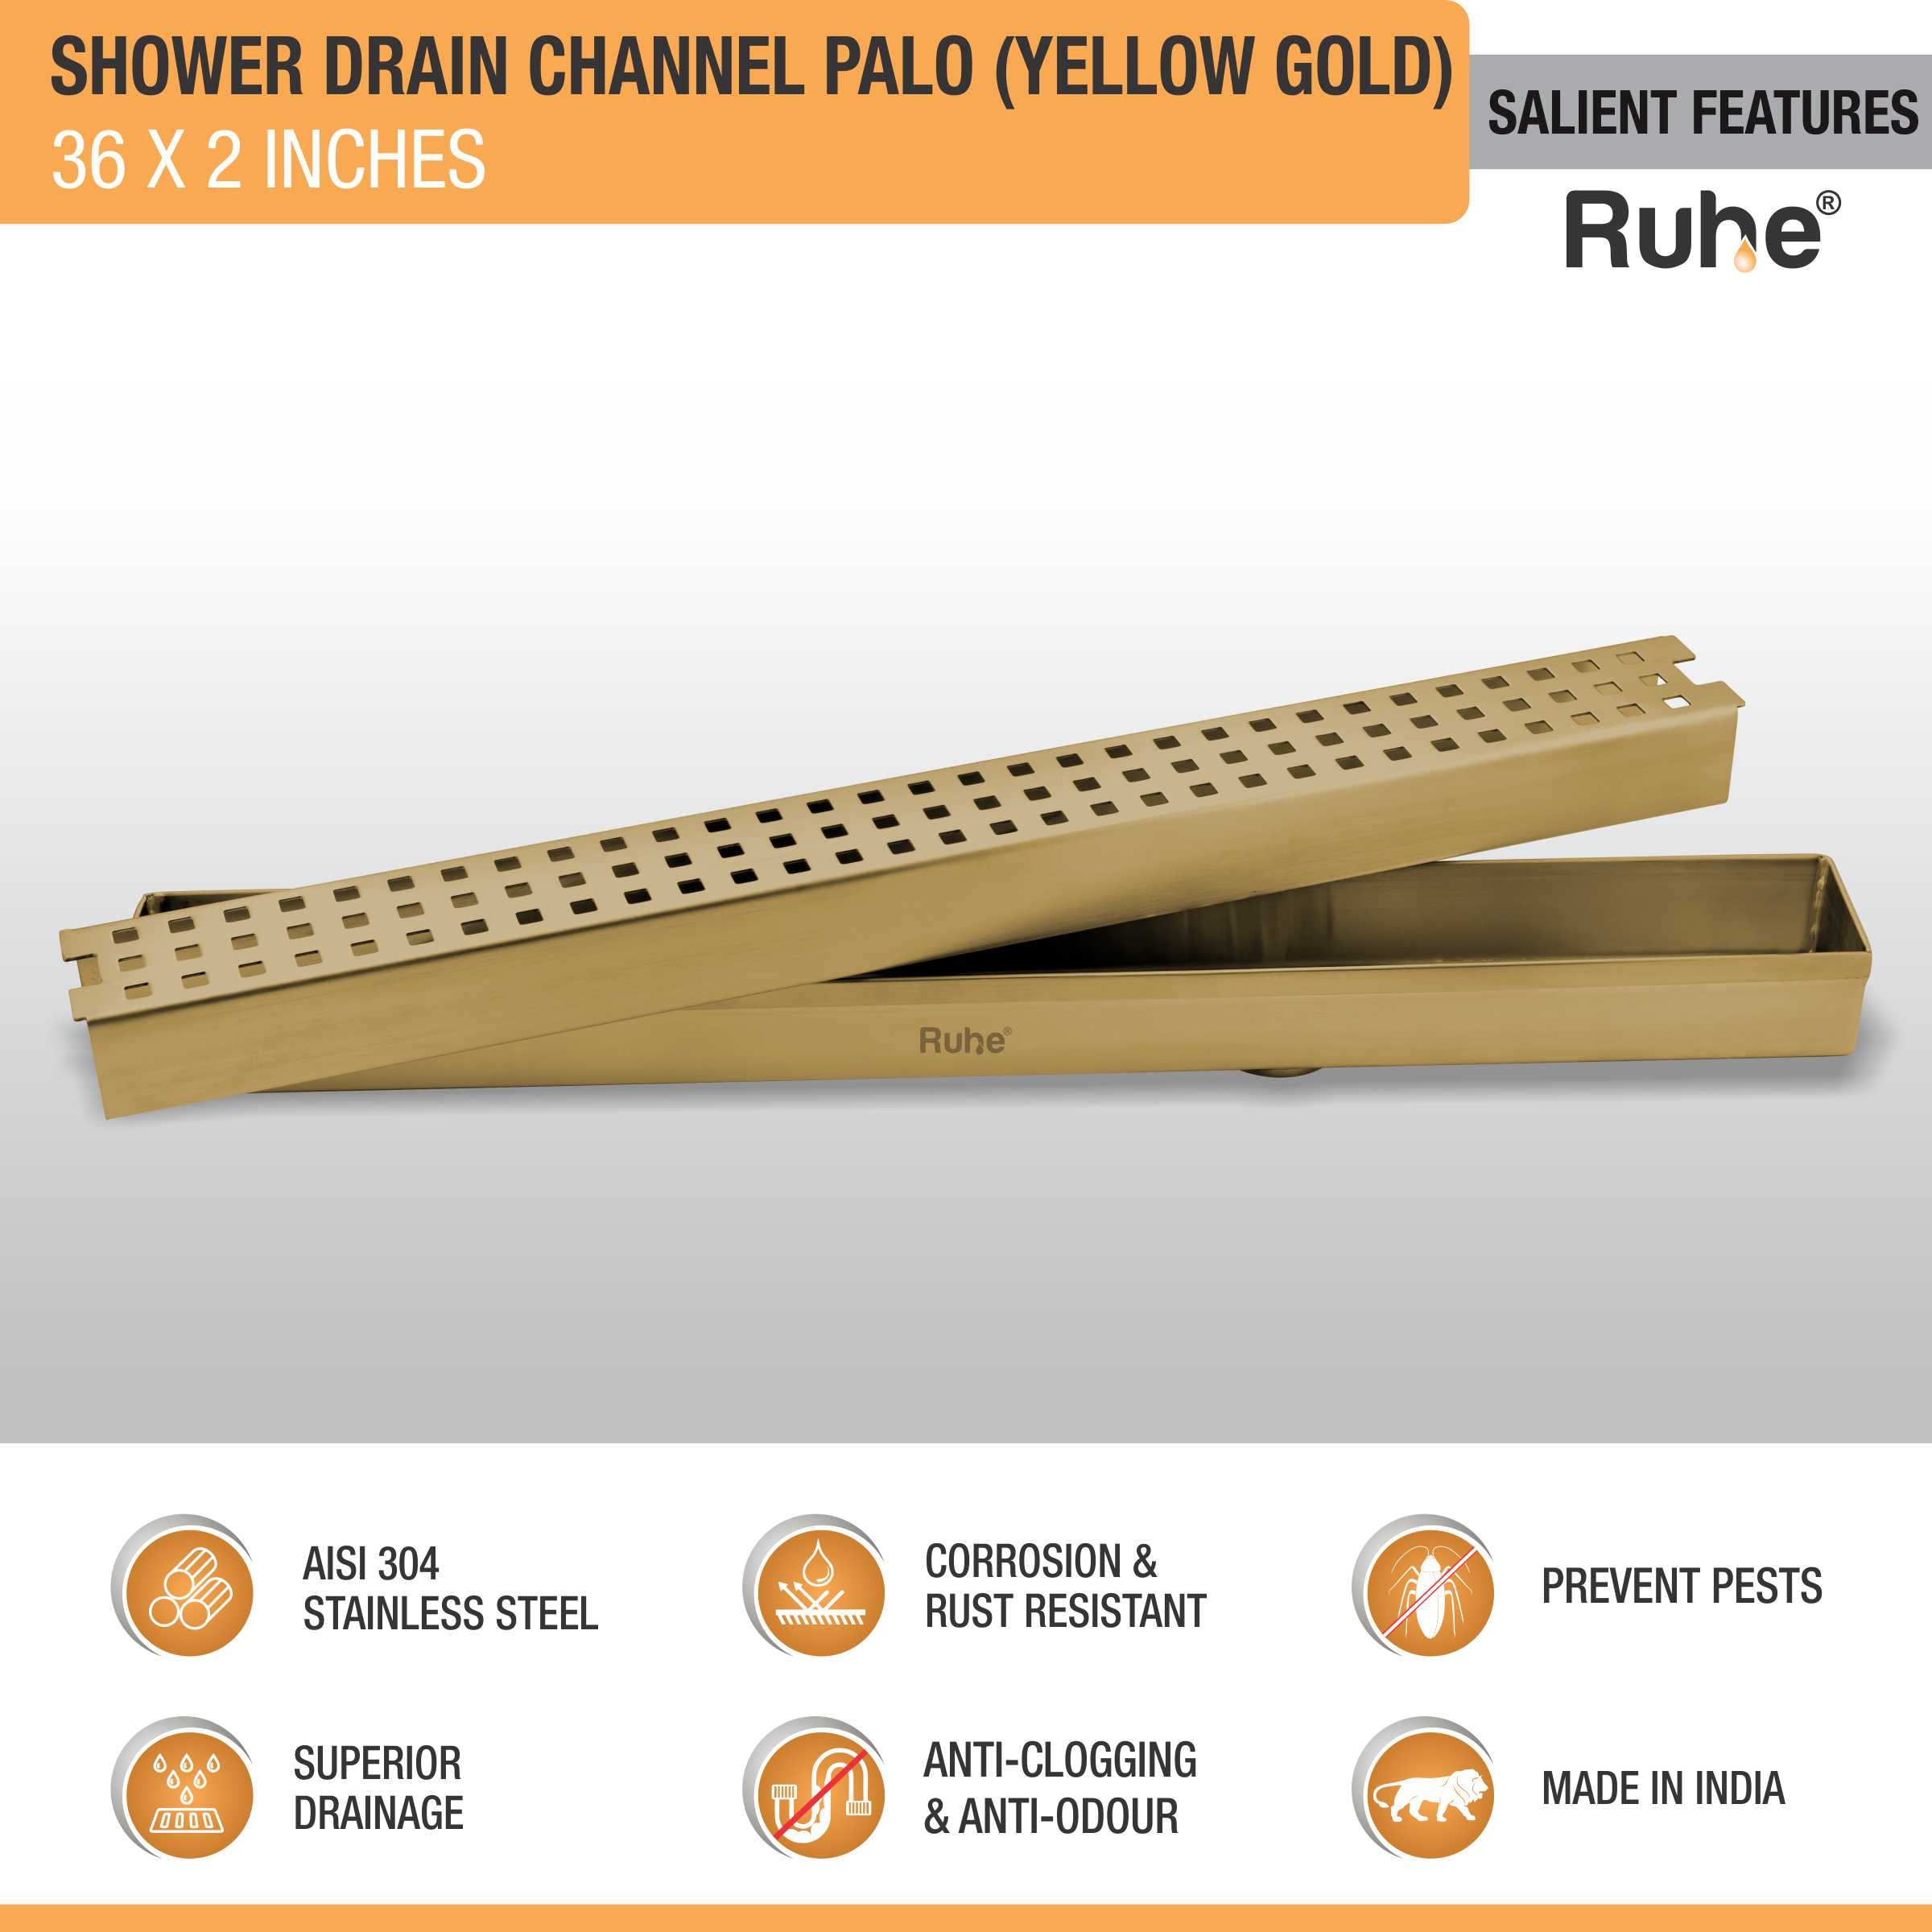 Palo Shower Drain Channel (36 x 2 Inches) YELLOW GOLD feature